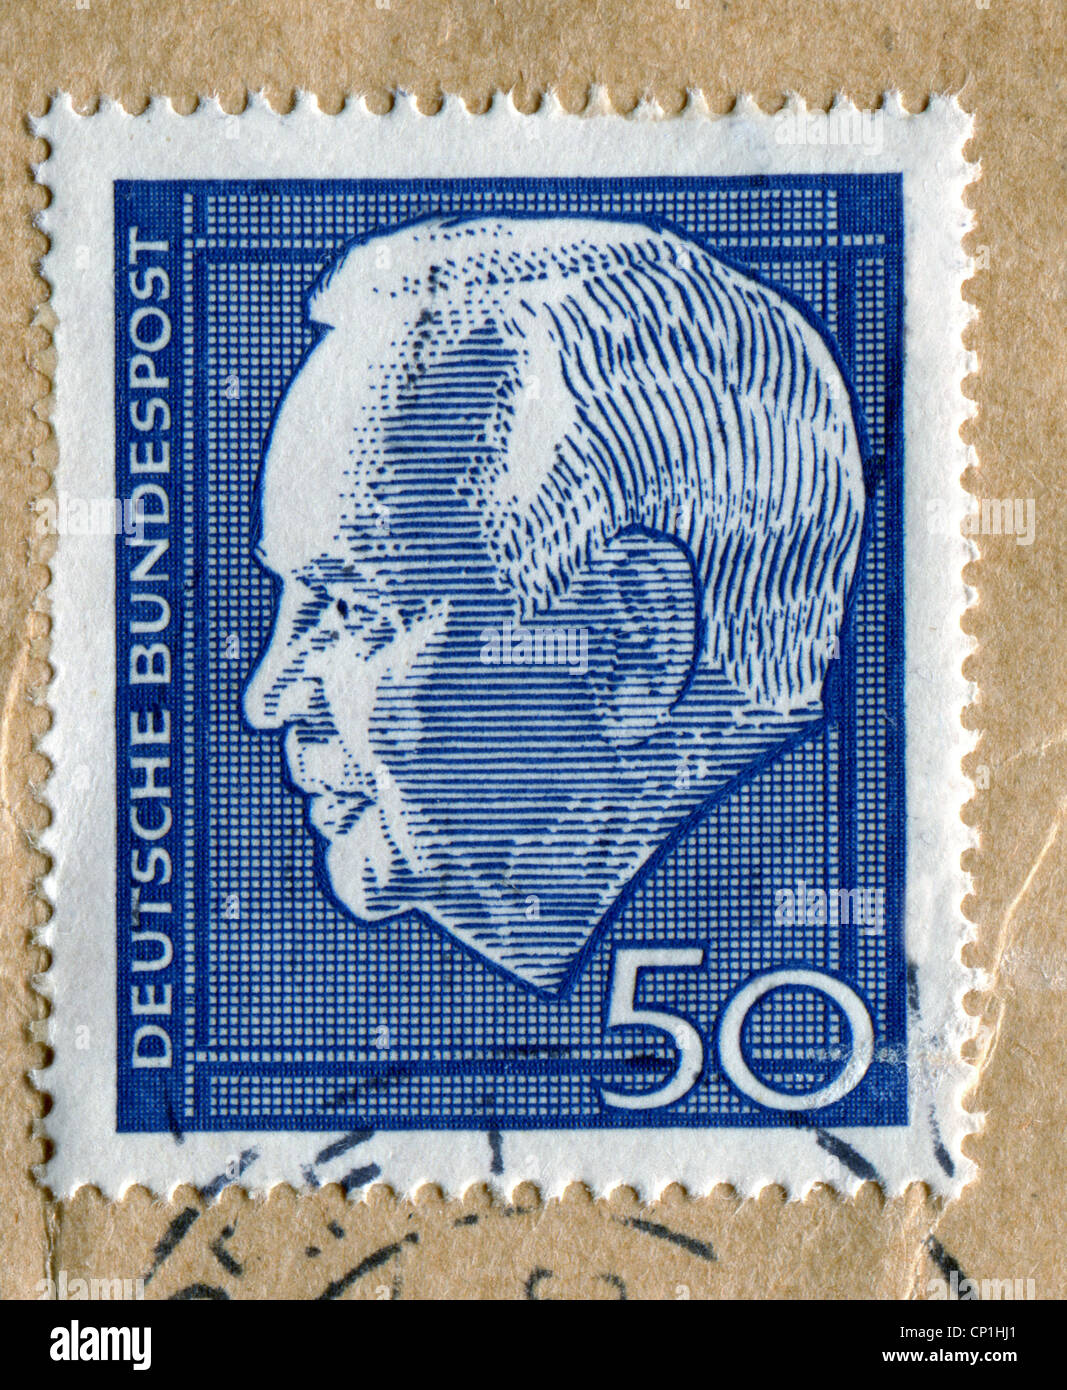 mail / post, postage stamps, West Germany, 50 Pfennig stamp with Stock Photo: 47978953 - Alamy